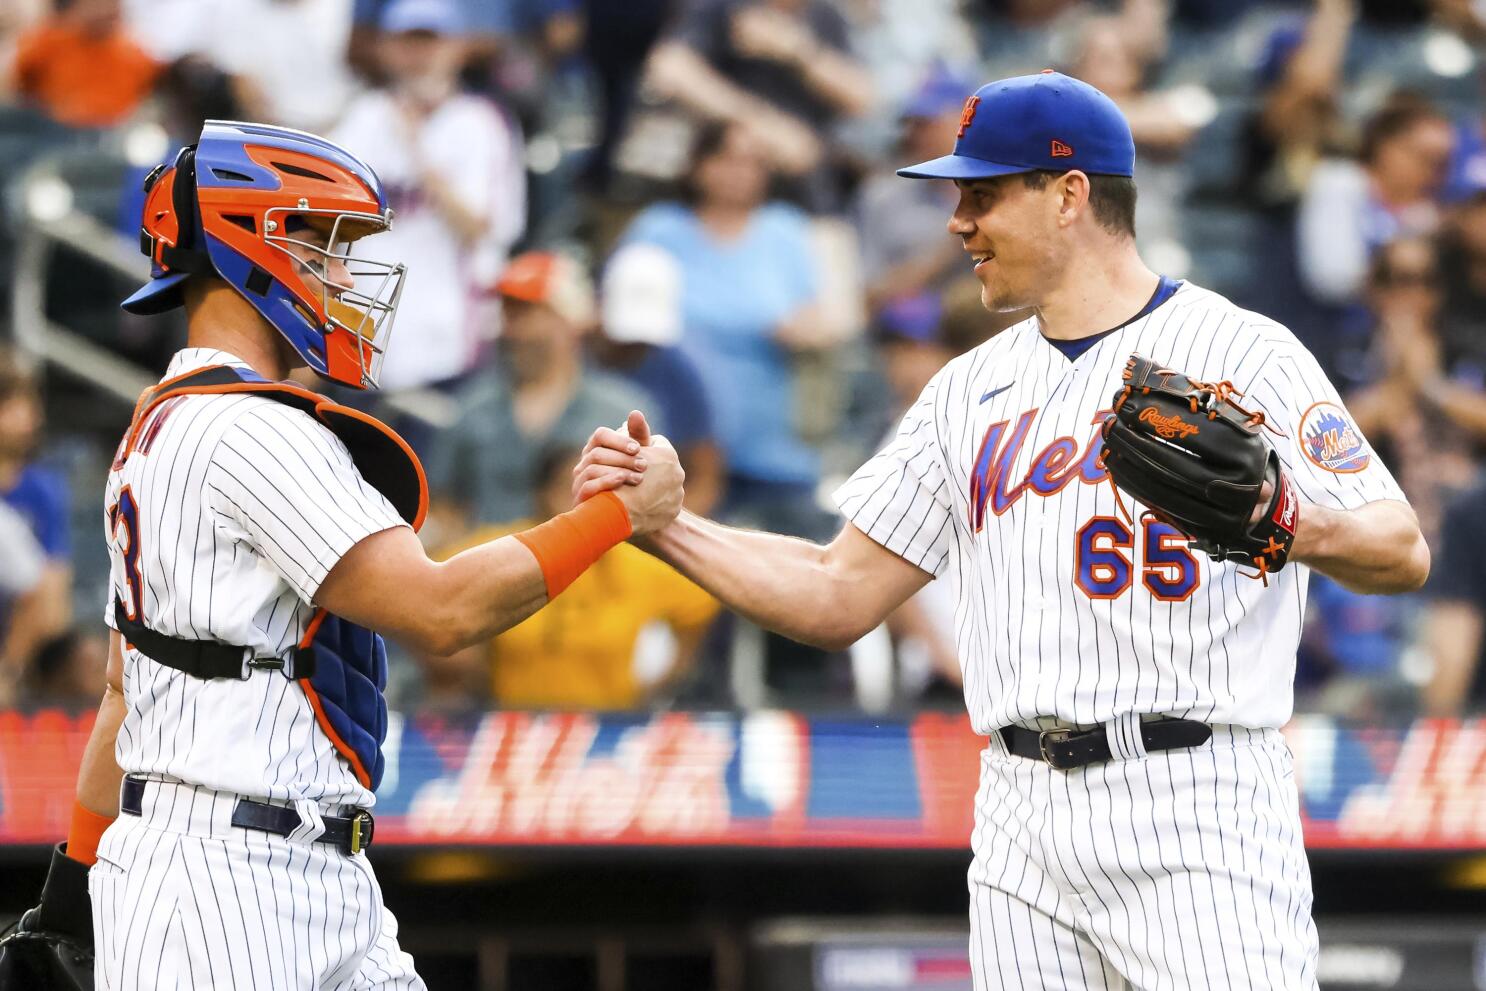 Mark Canha on Jacob deGrom: Jake told me he wants to come back